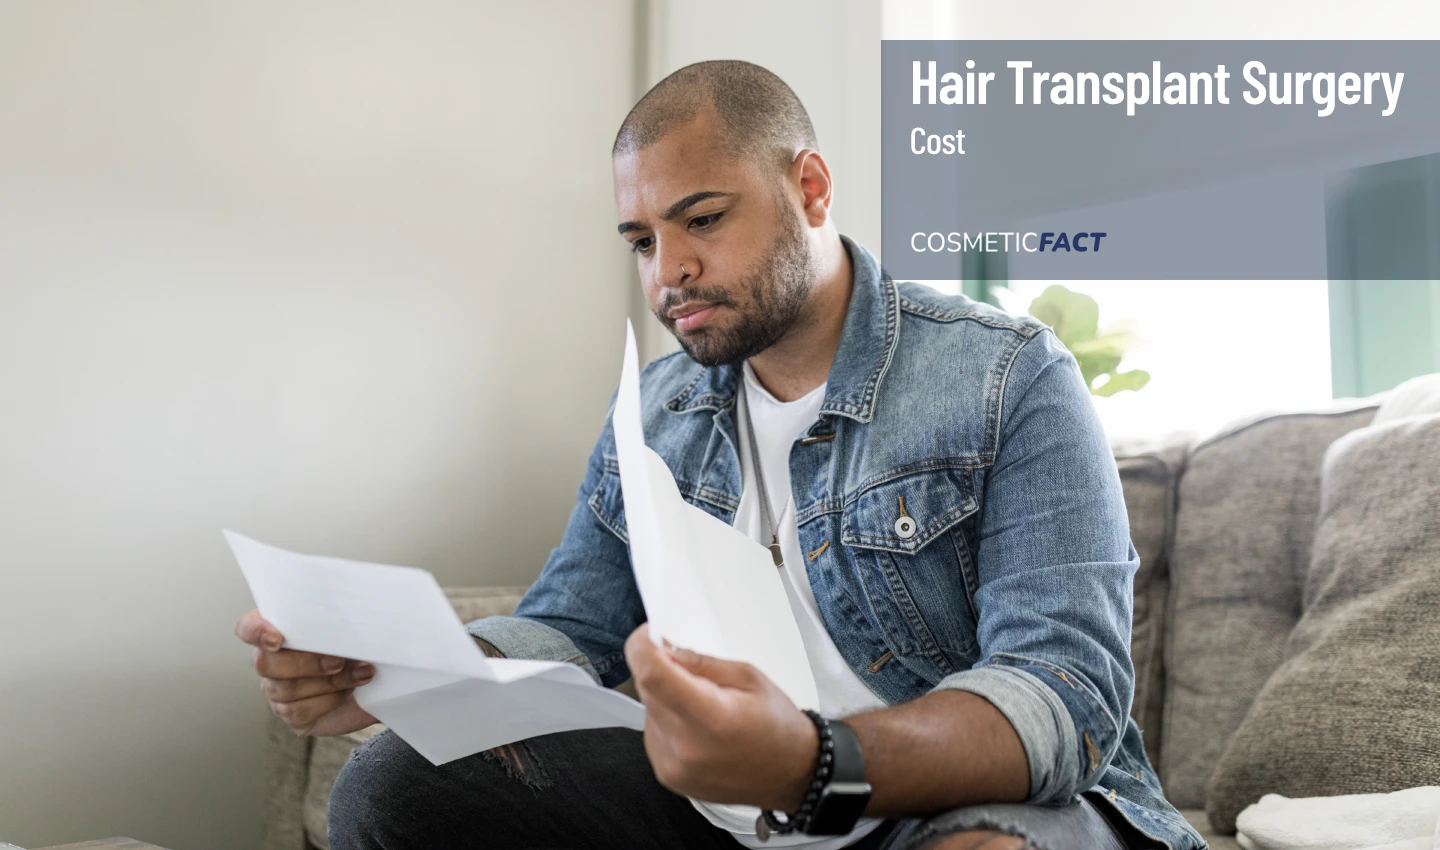 An individual holding a bill for a hair transplant surgery, with focus on the cost aspect.